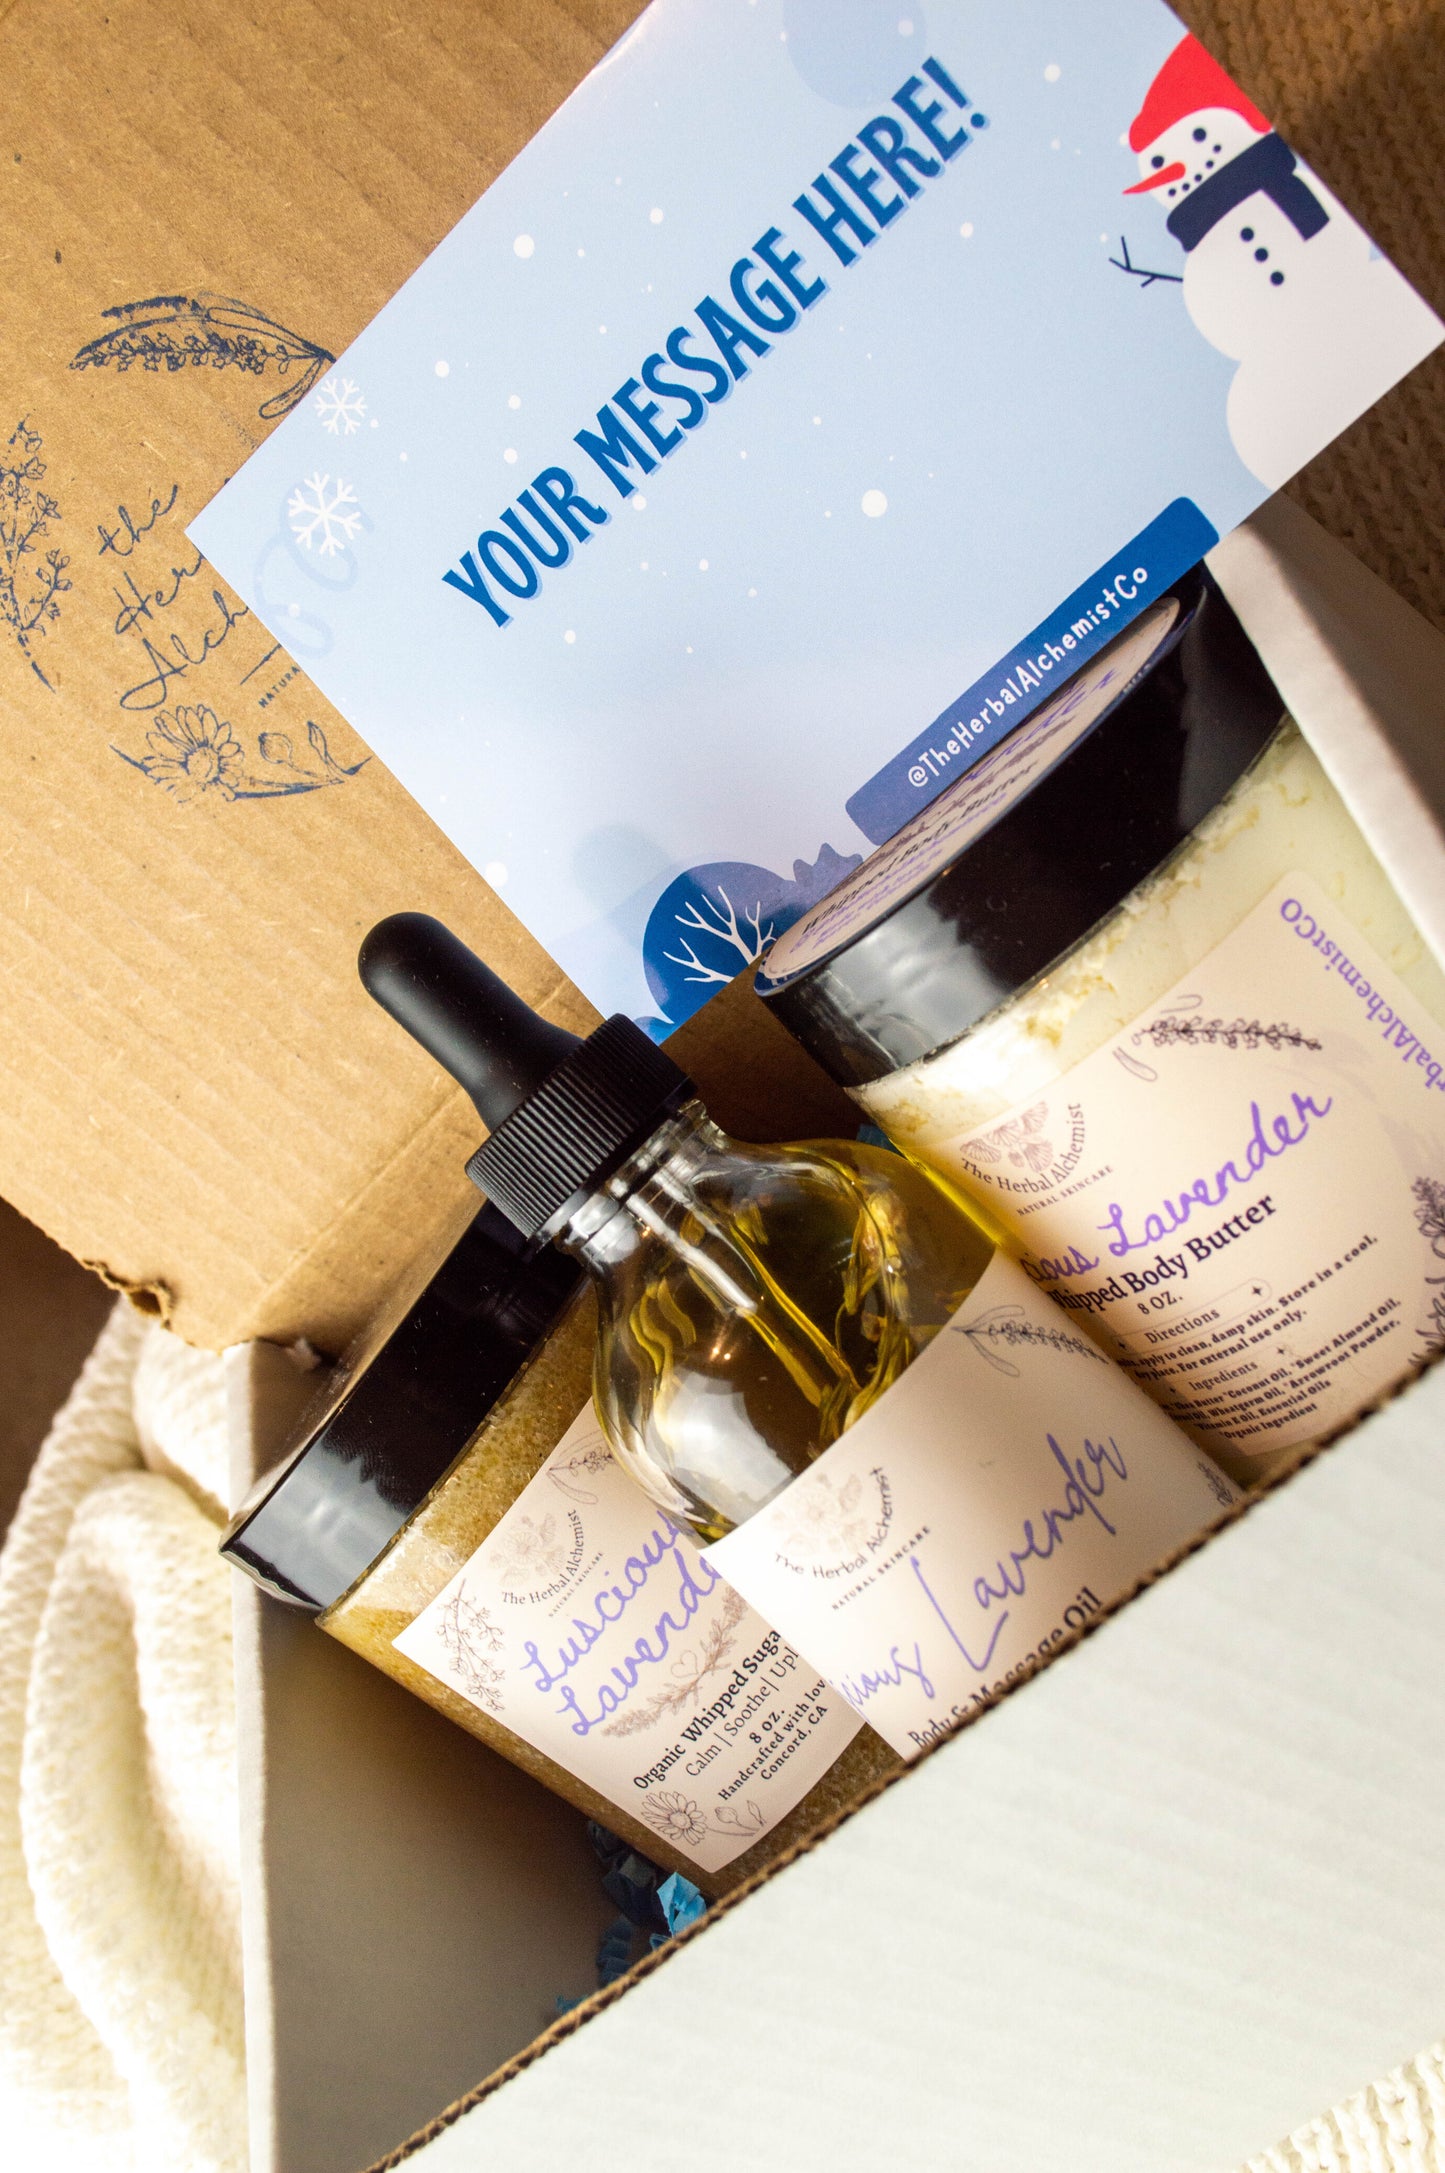 Customize Your Gift Box! - The Herbal Alchemist